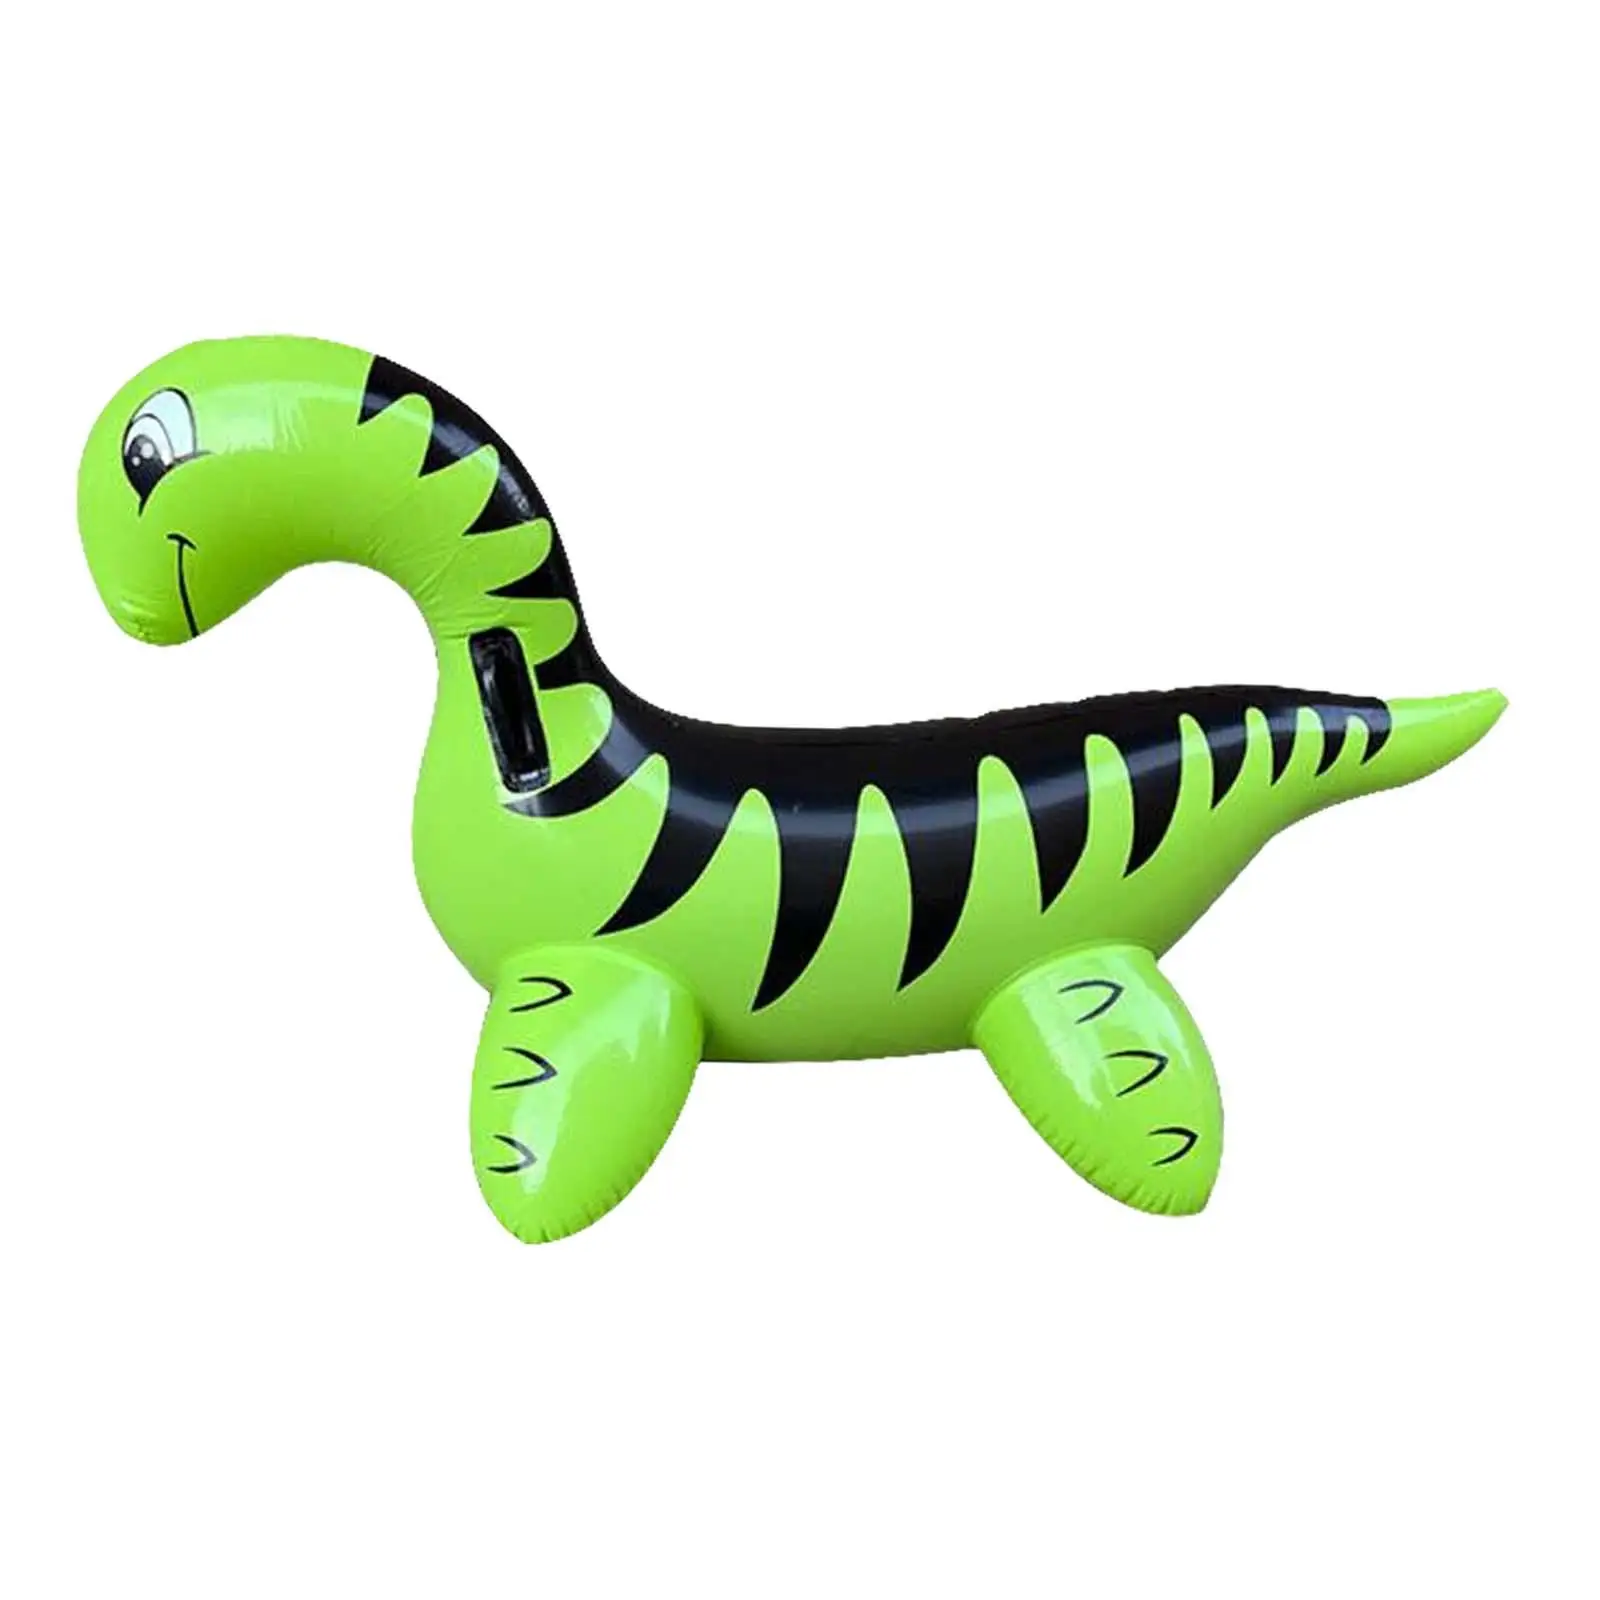 Dinosaur Pool Floats Ride Ons Inflatable Pool Toys for Swimming Party Summer